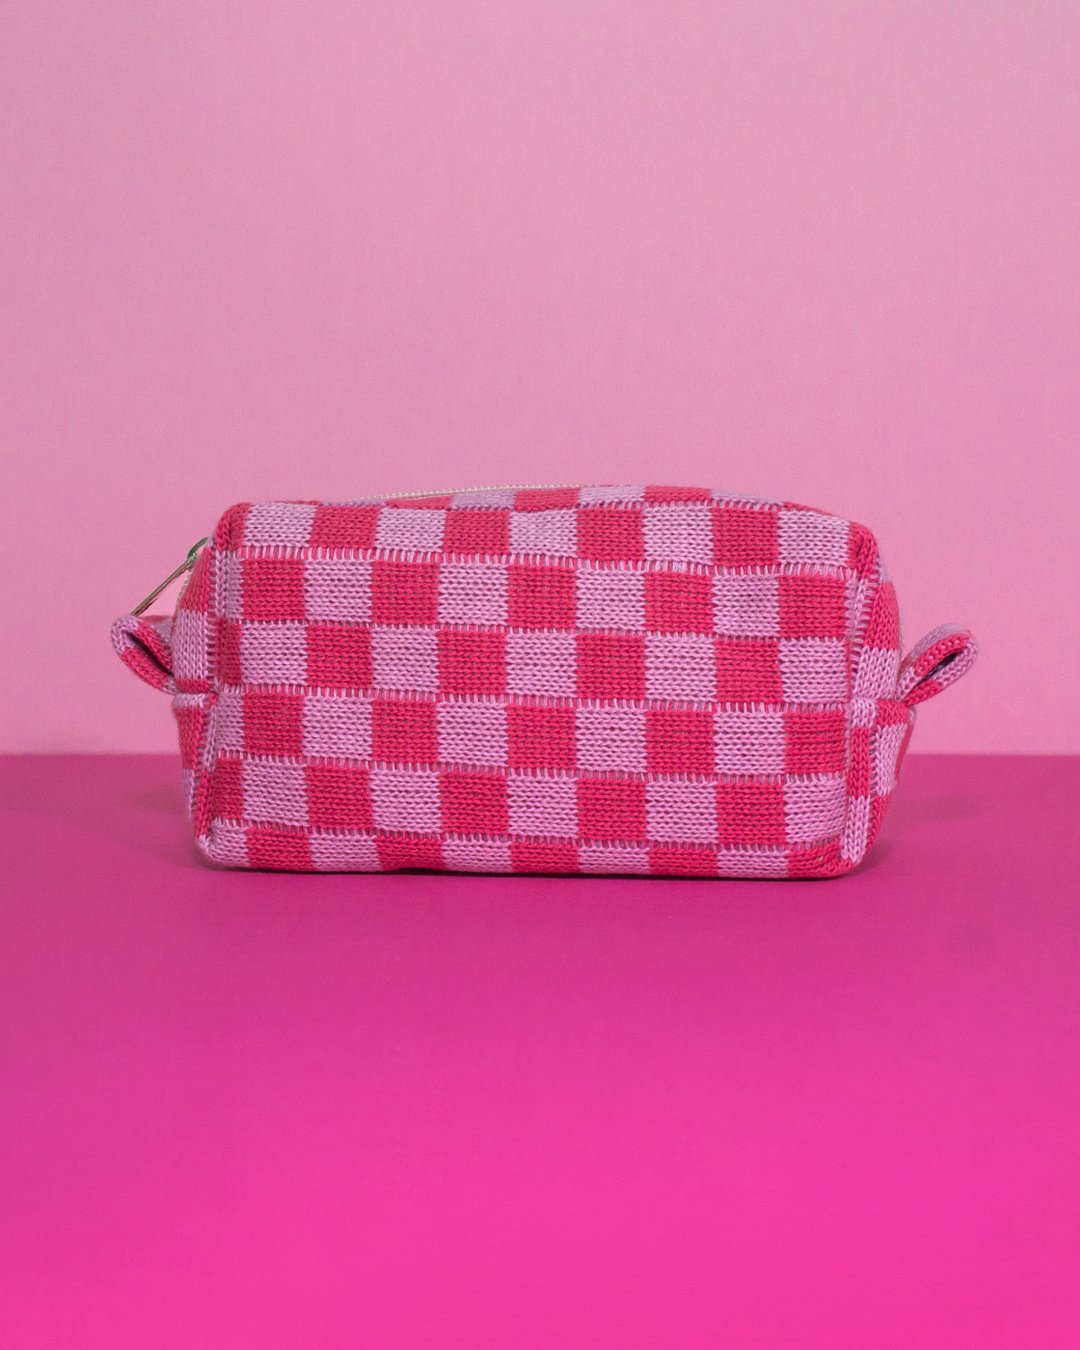 Clarence & Co. Pink and White Checked Pouch